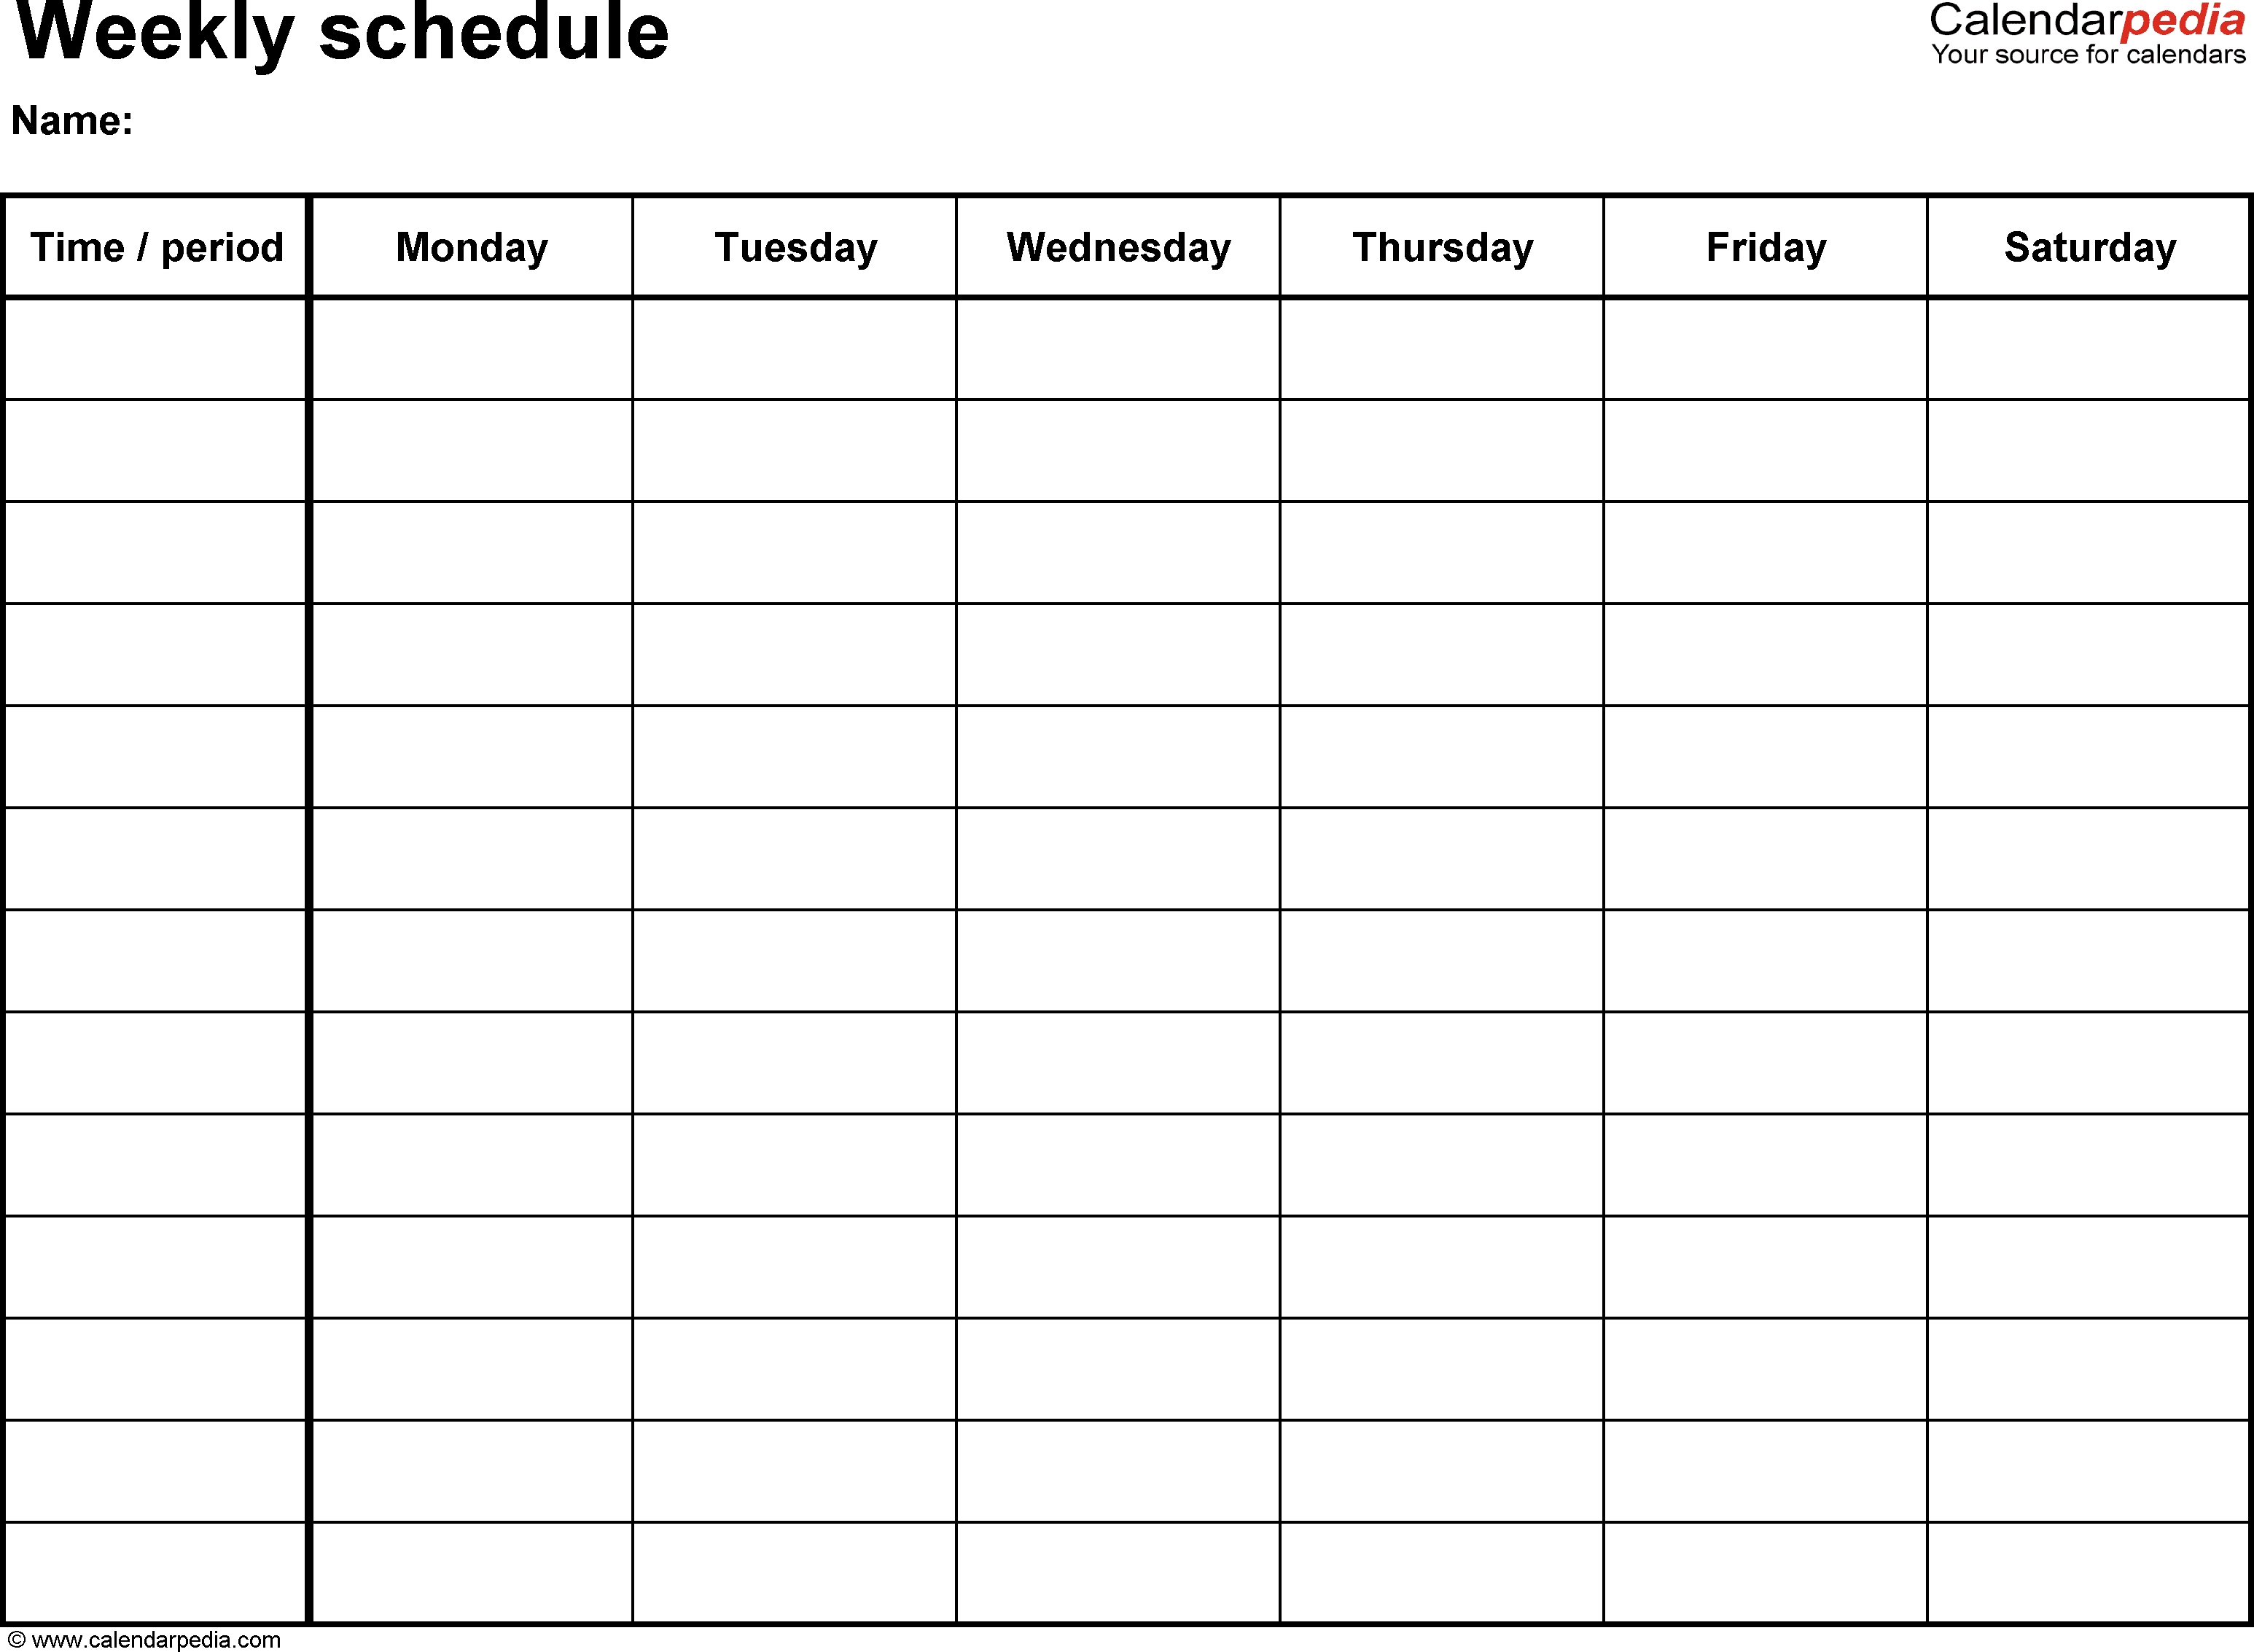 Free Weekly Schedule Templates For Word - 18 Templates regarding Monday - Sunday Weekly Schedule